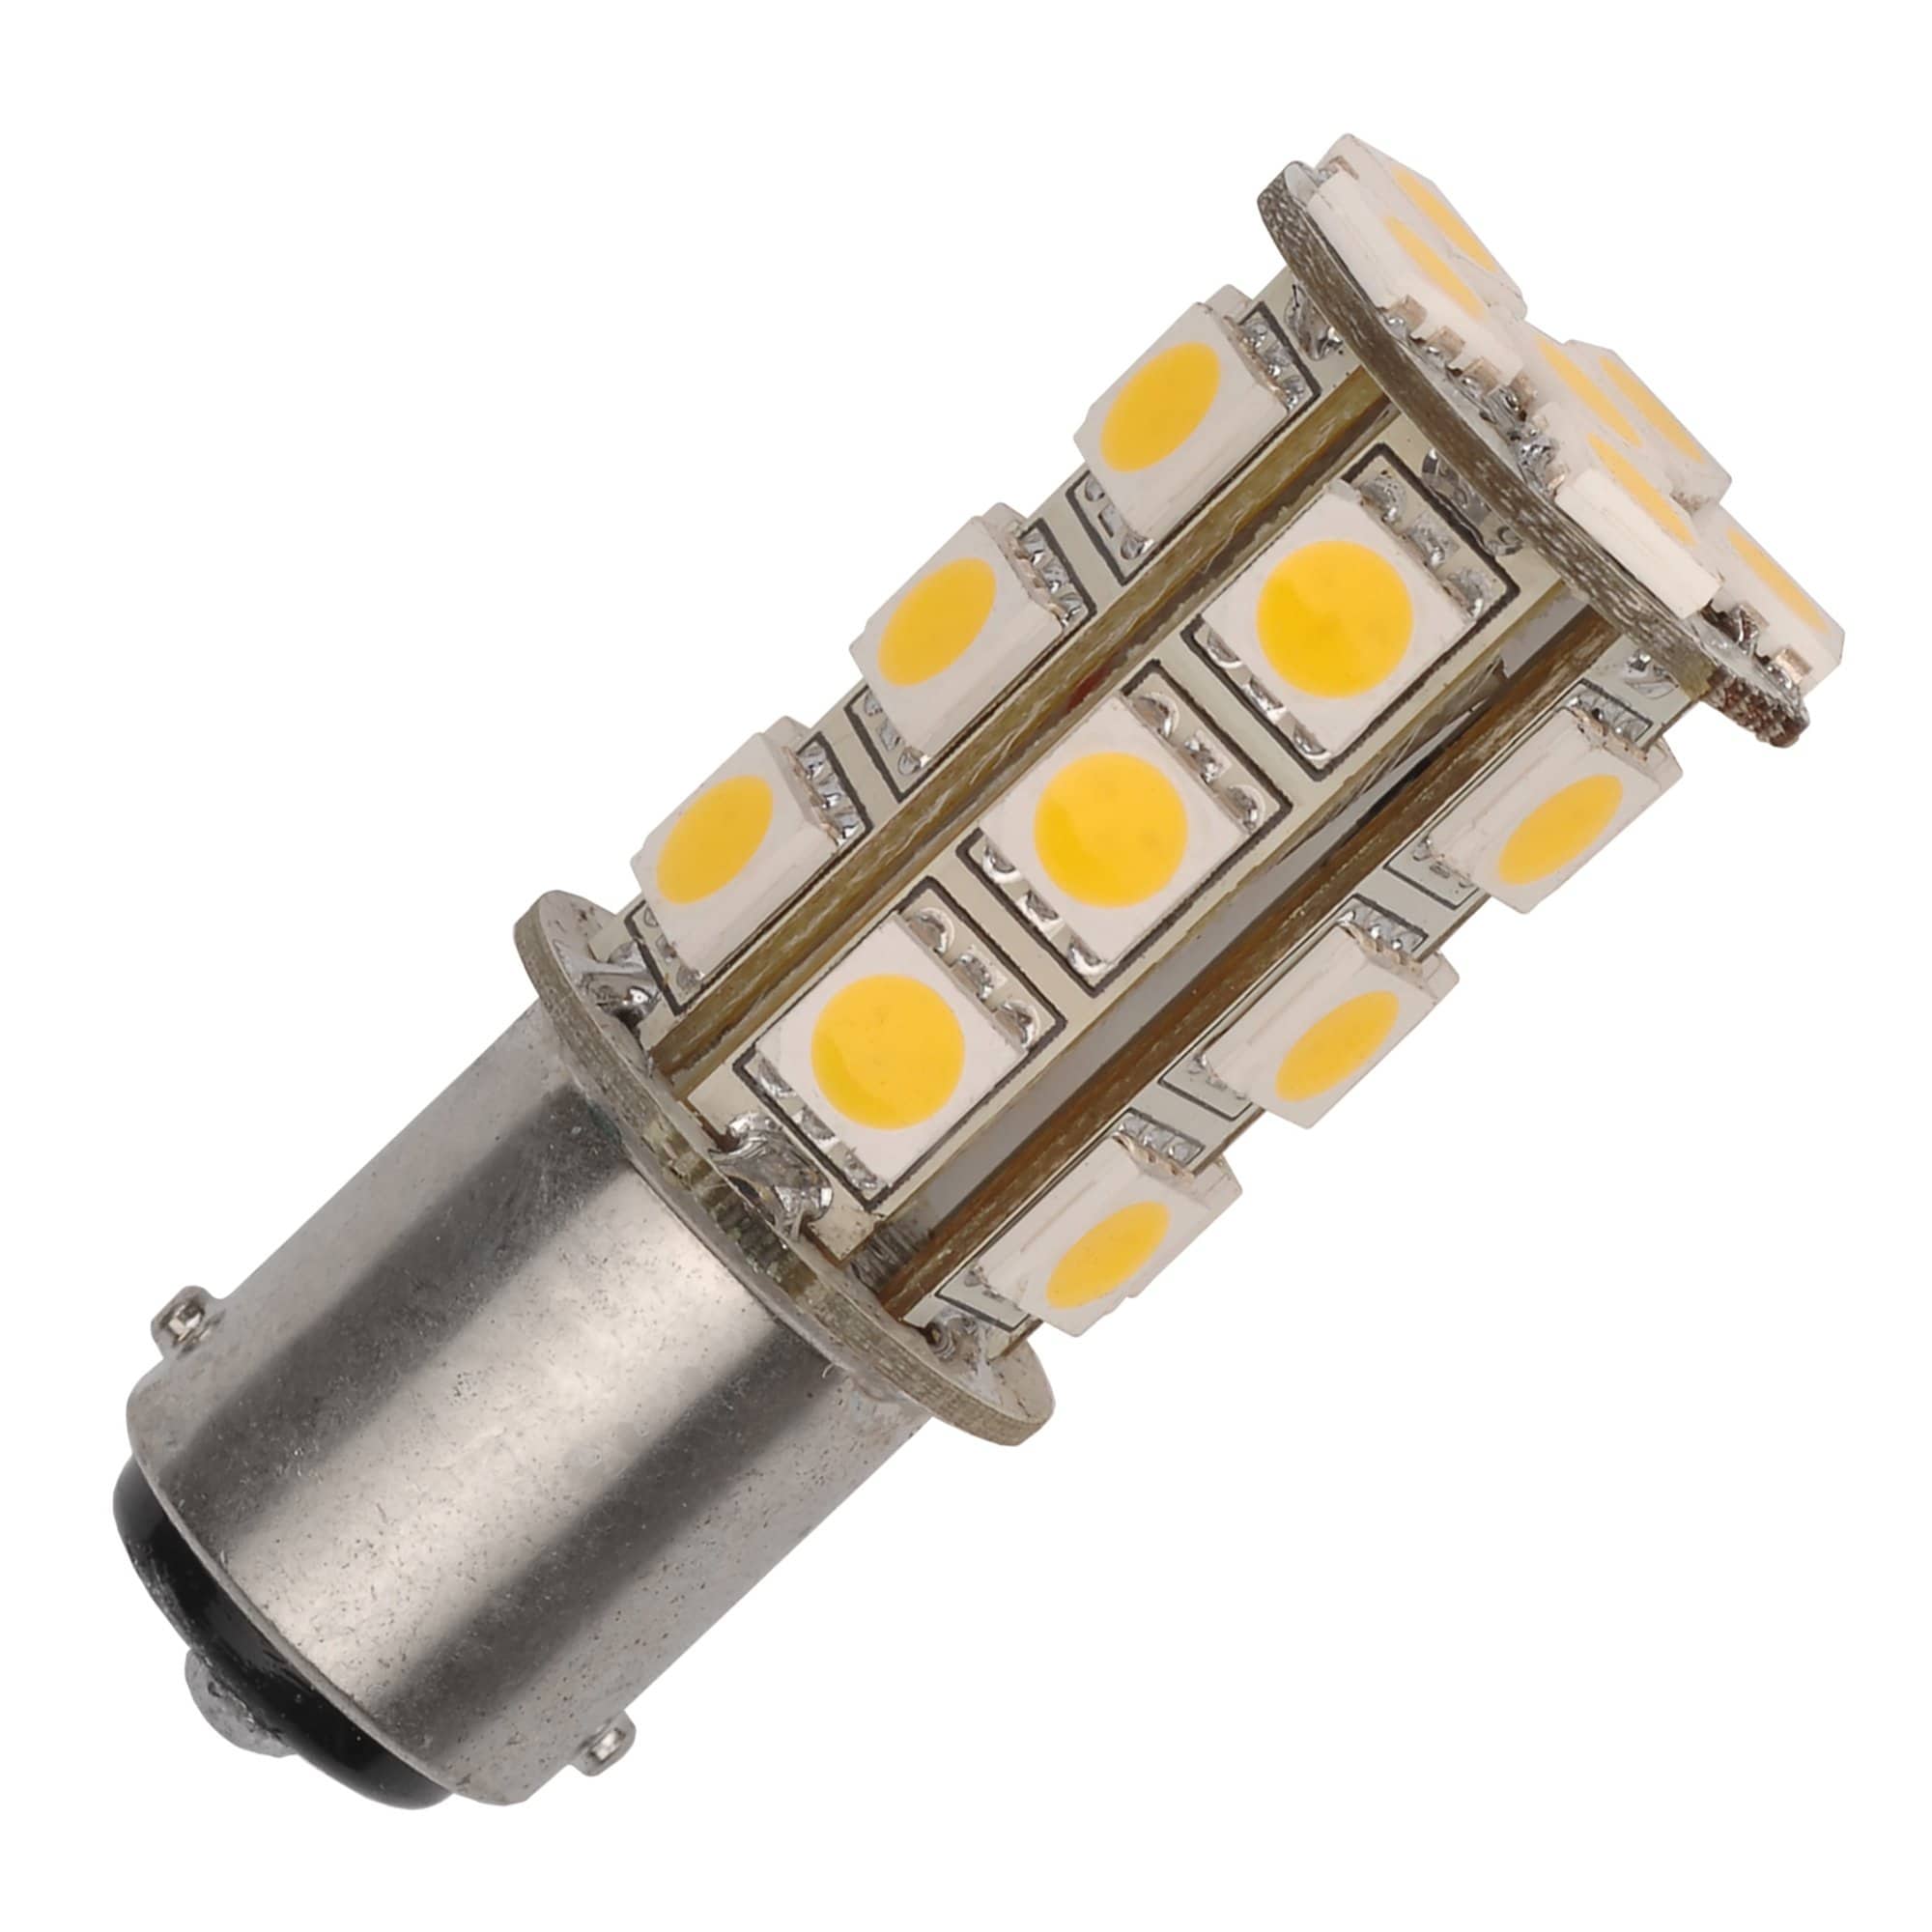 AP Products 016-1076-205 Tower LED Bulb 205 Lms, Replaces 78, 90 ,94, 1004